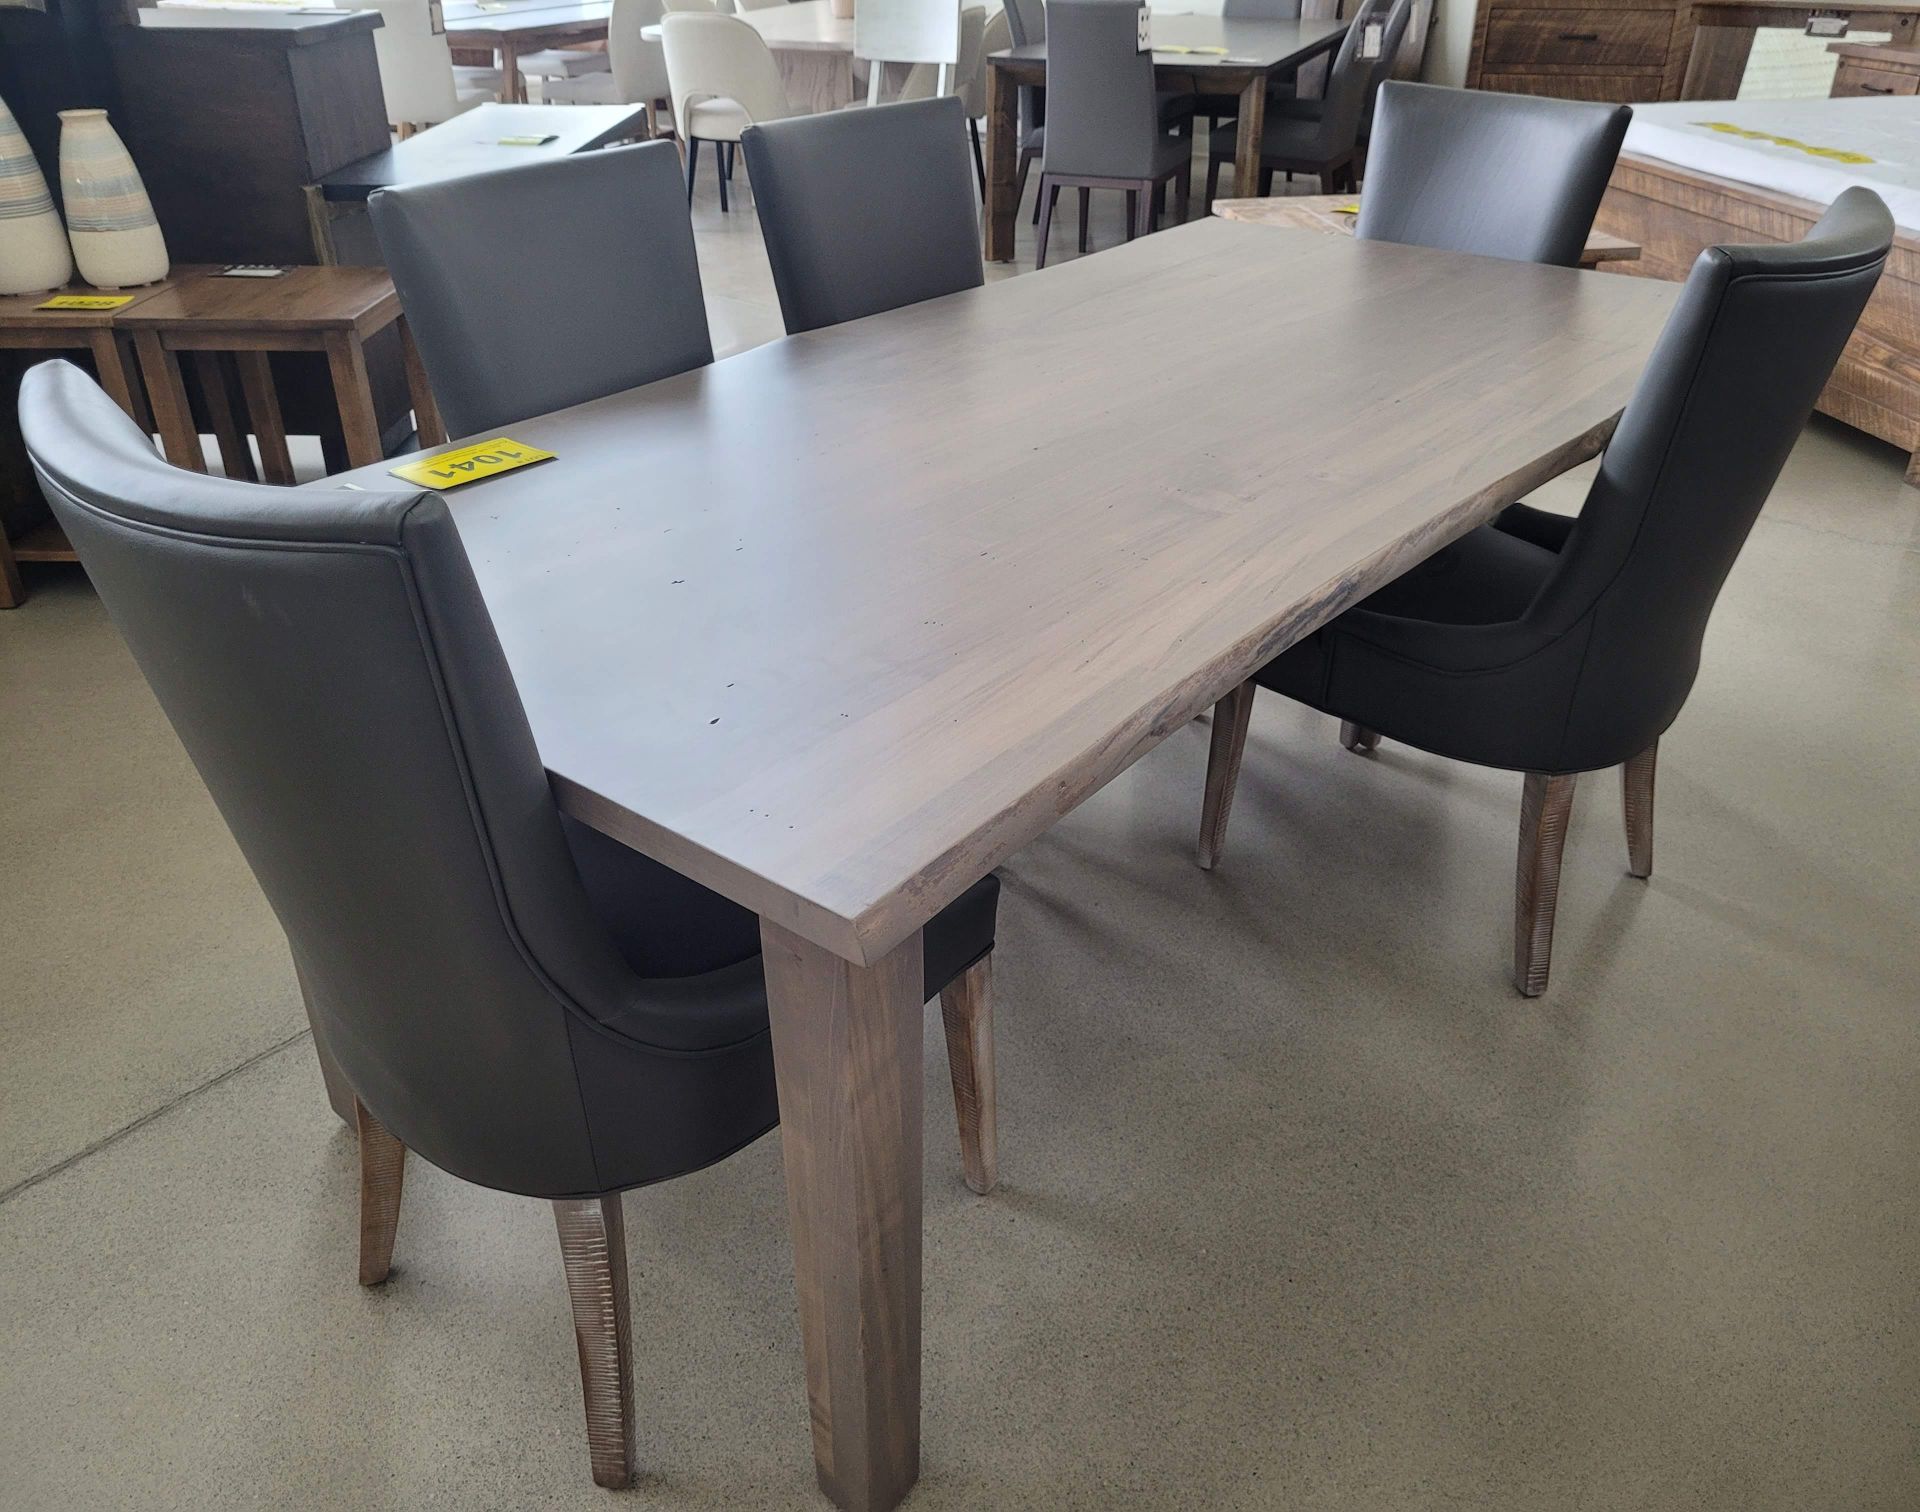 NORAH LIVE EDGE DINING TABLE - MSRP $3,600.00 - (TABLE ONLY - CHAIRS LOTTED SEPARATELY) - Image 8 of 8